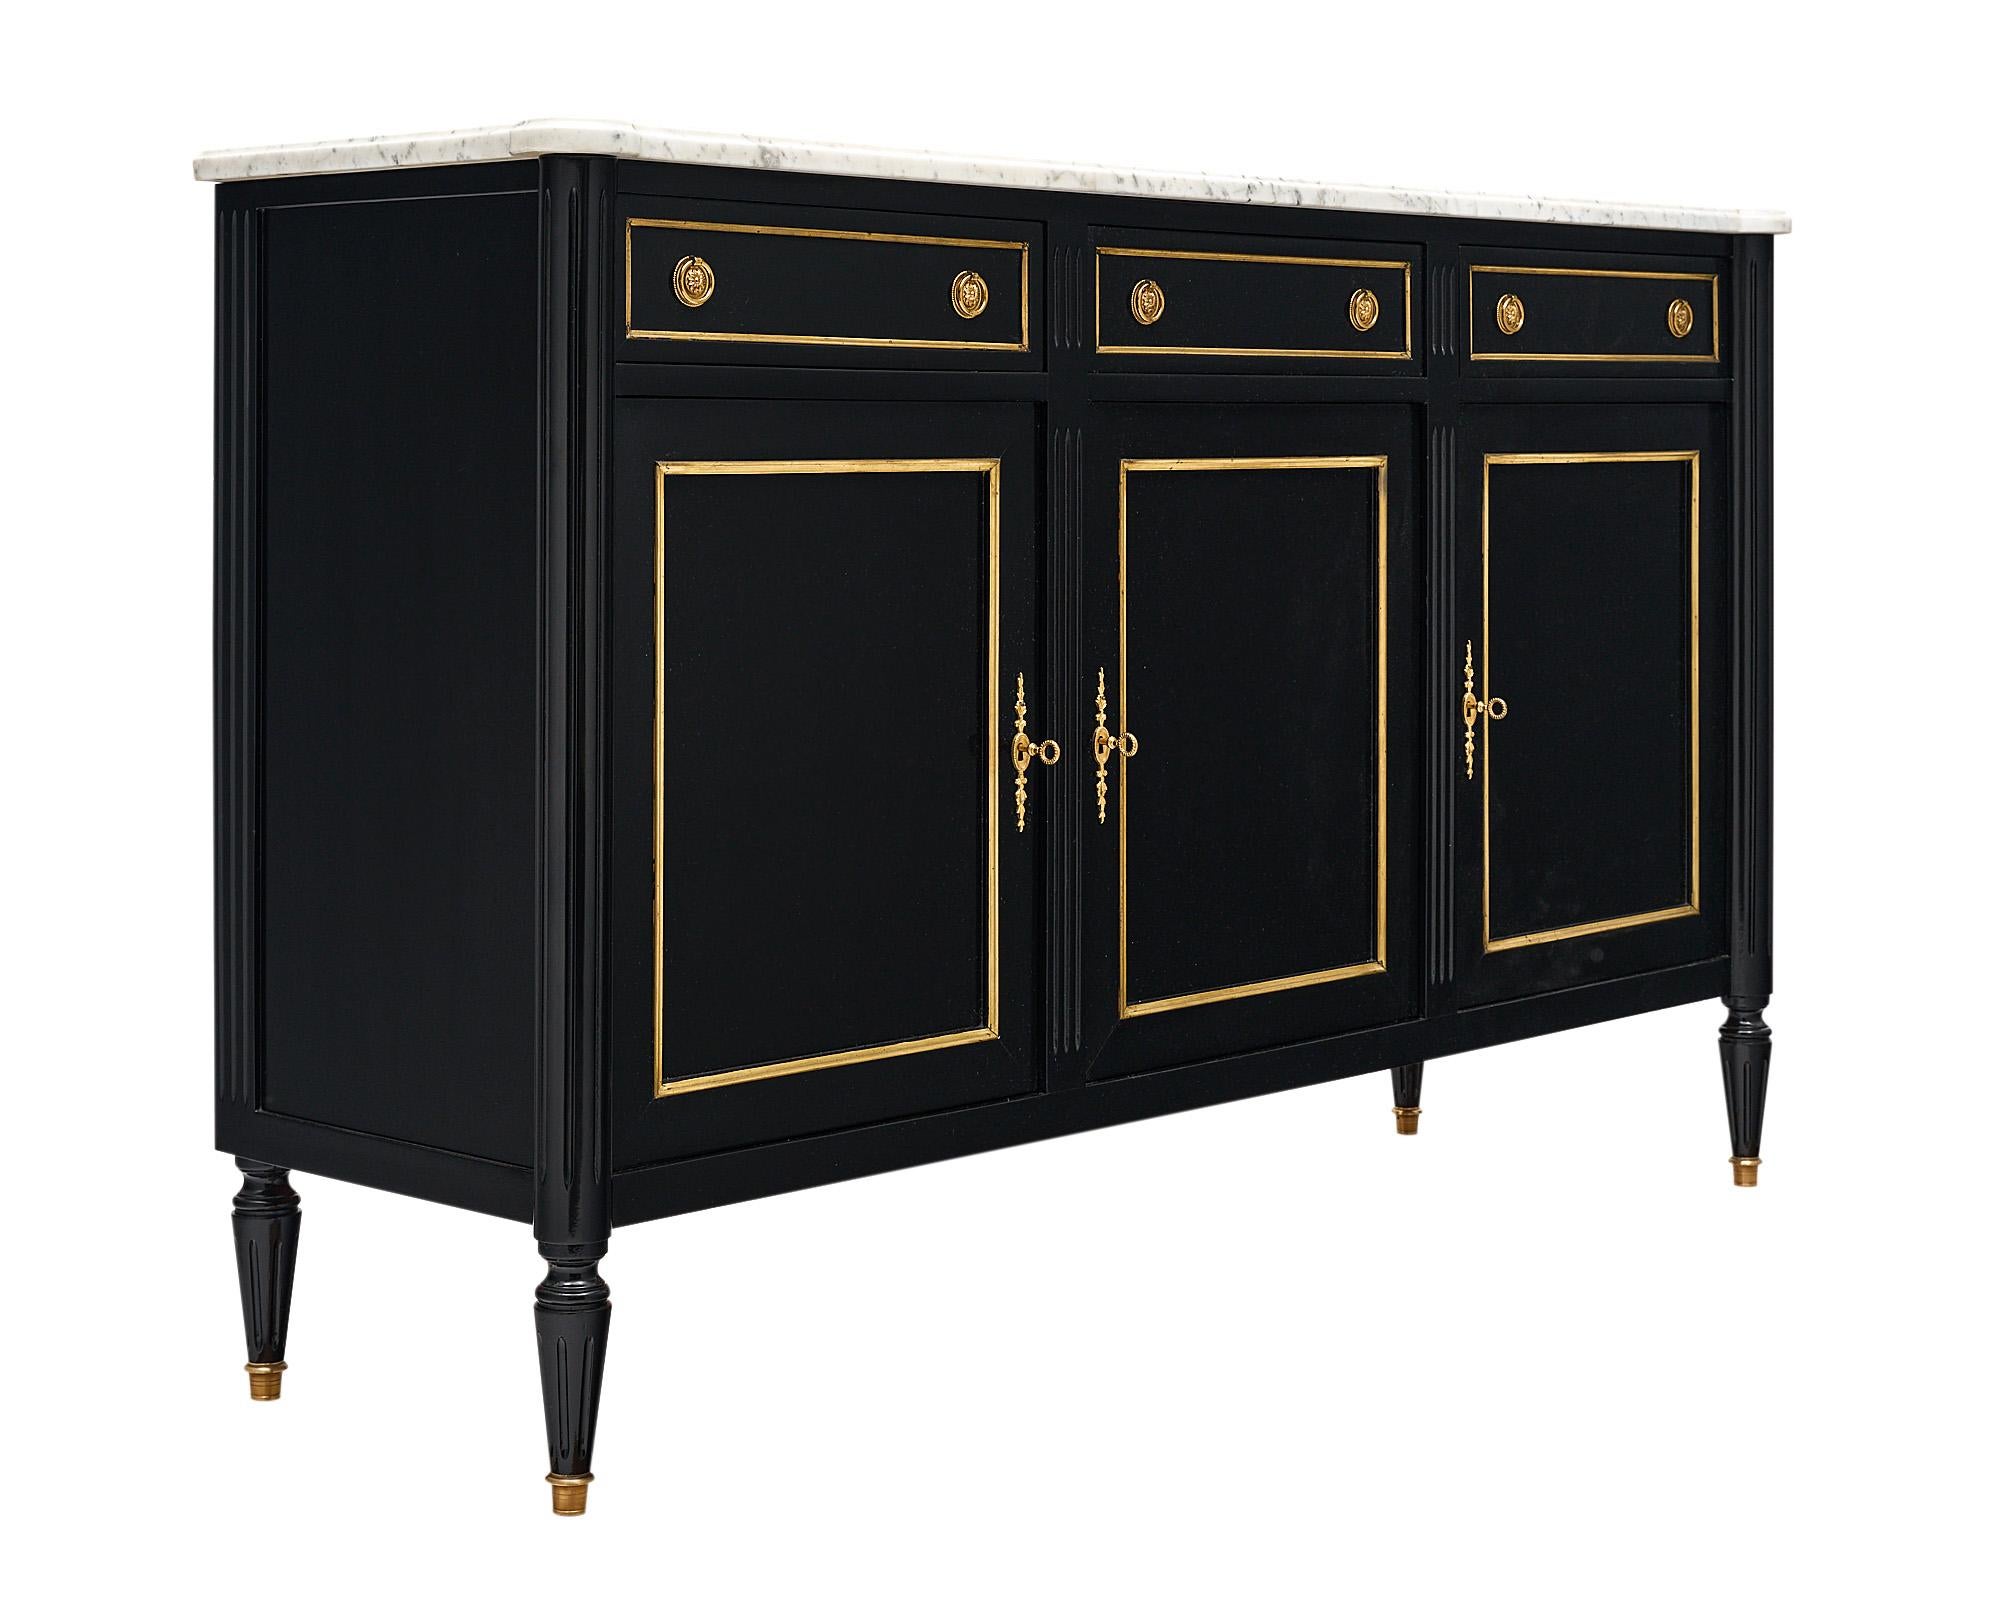 Buffet / enfilade from France made of solid mahogany that has been ebonized and finished in a lustrous museum-quality French polish. Three dovetailed drawers are above three doors opening to interior shelving. All locks are in working condition. The